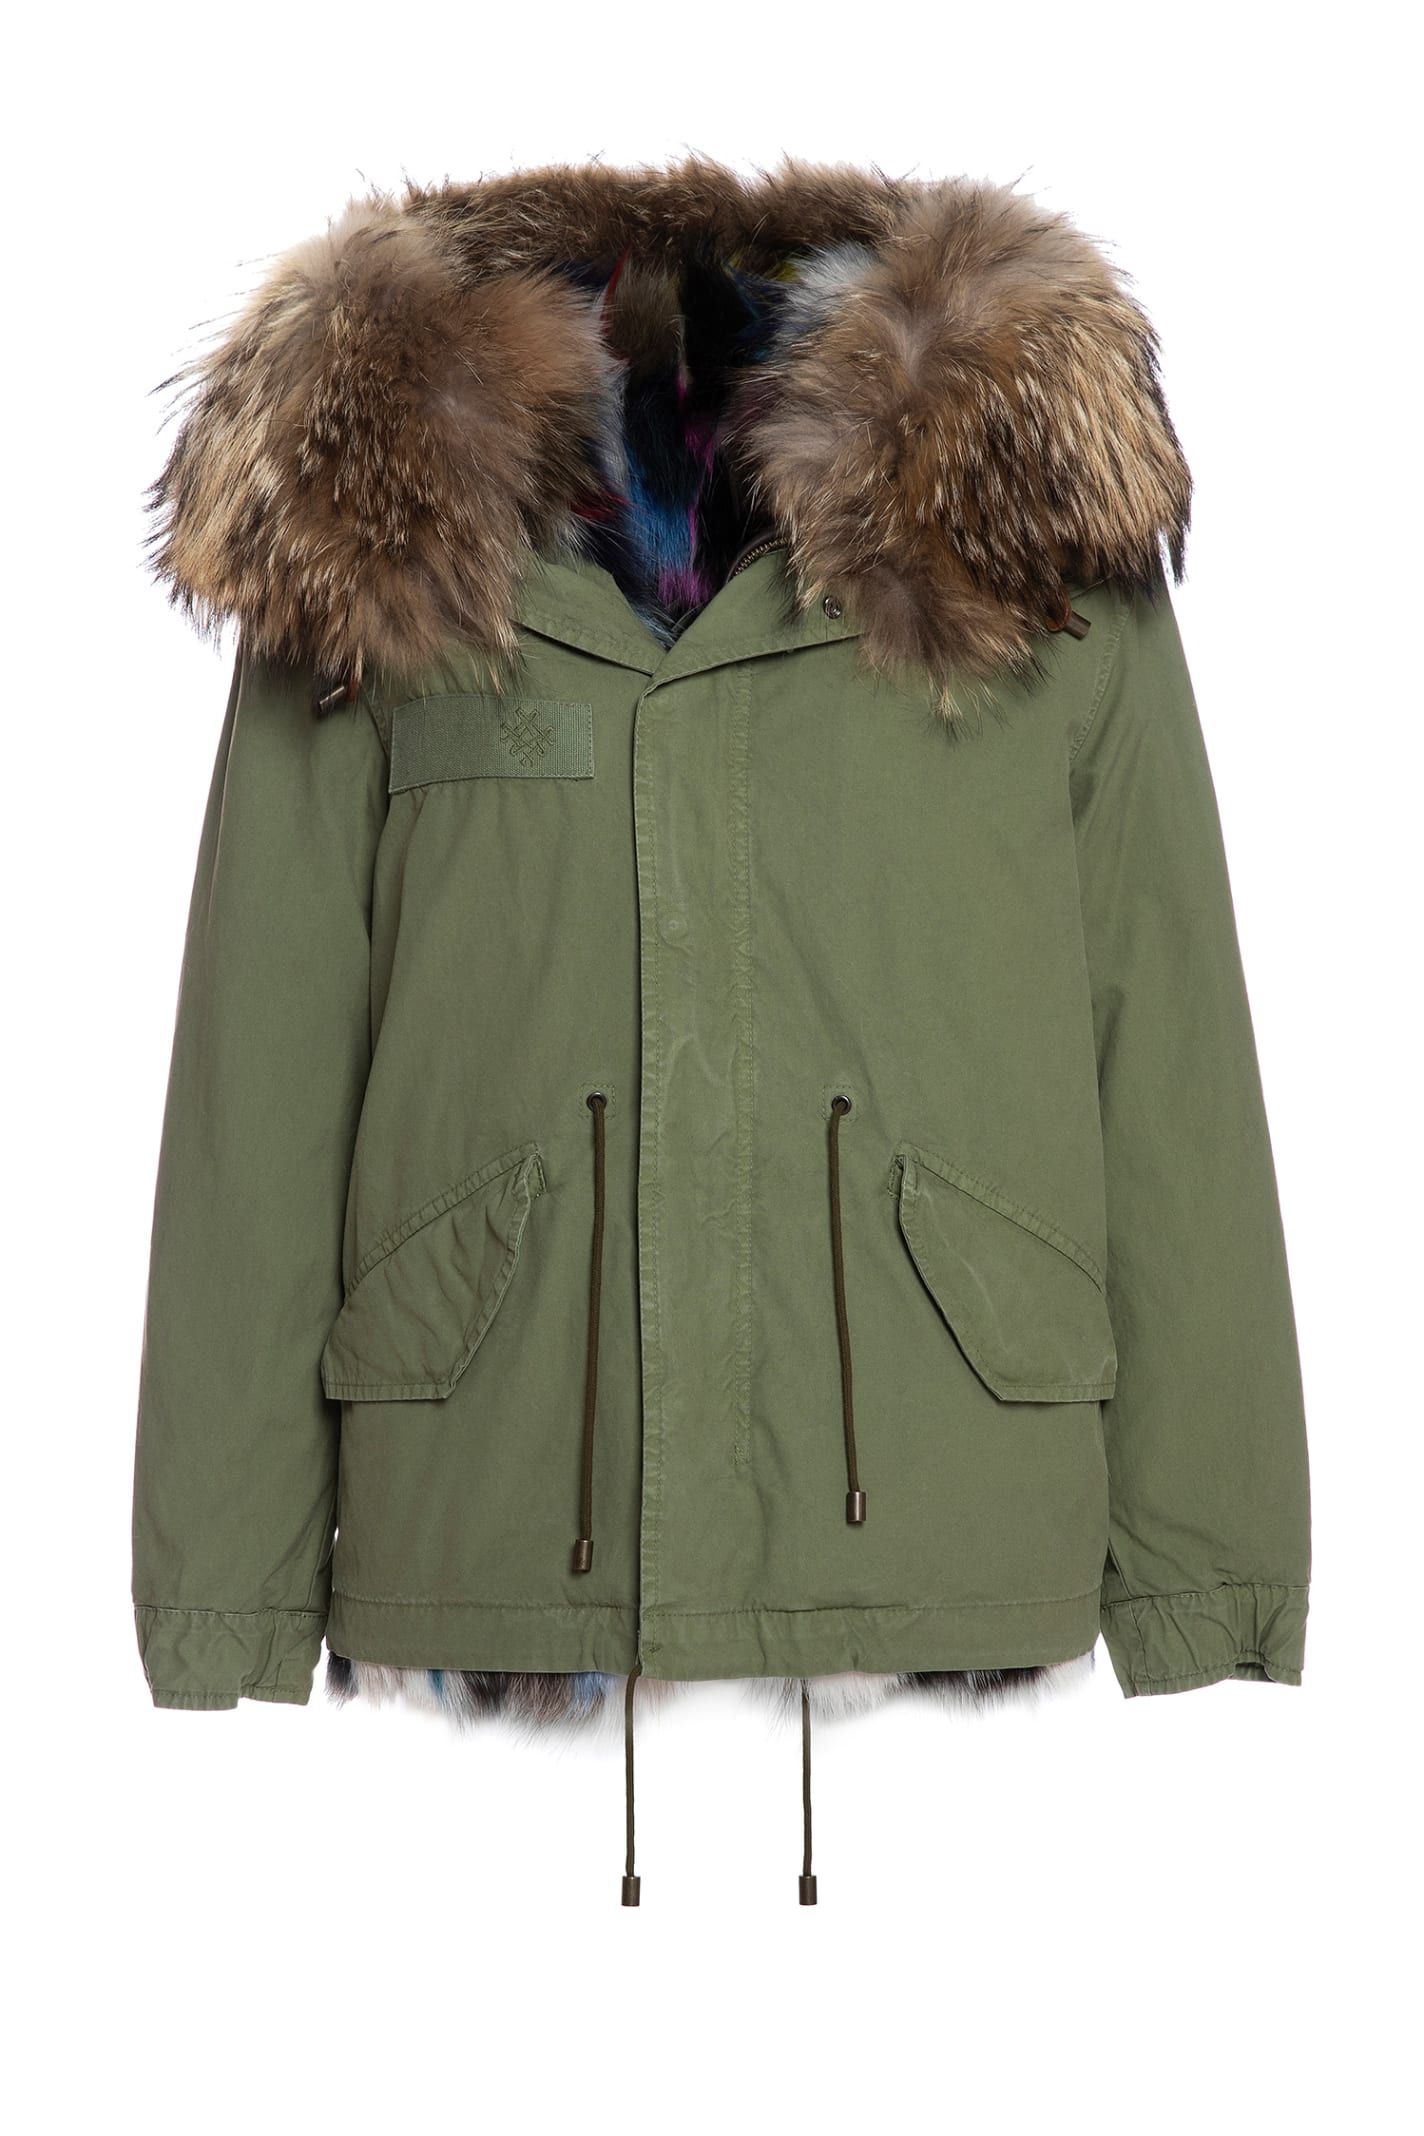 Mr & Mrs Italy Exclusive Fw20 Icon Parka: Army Cotton Canvas Mini Parka With Patch Fox Fur Lining